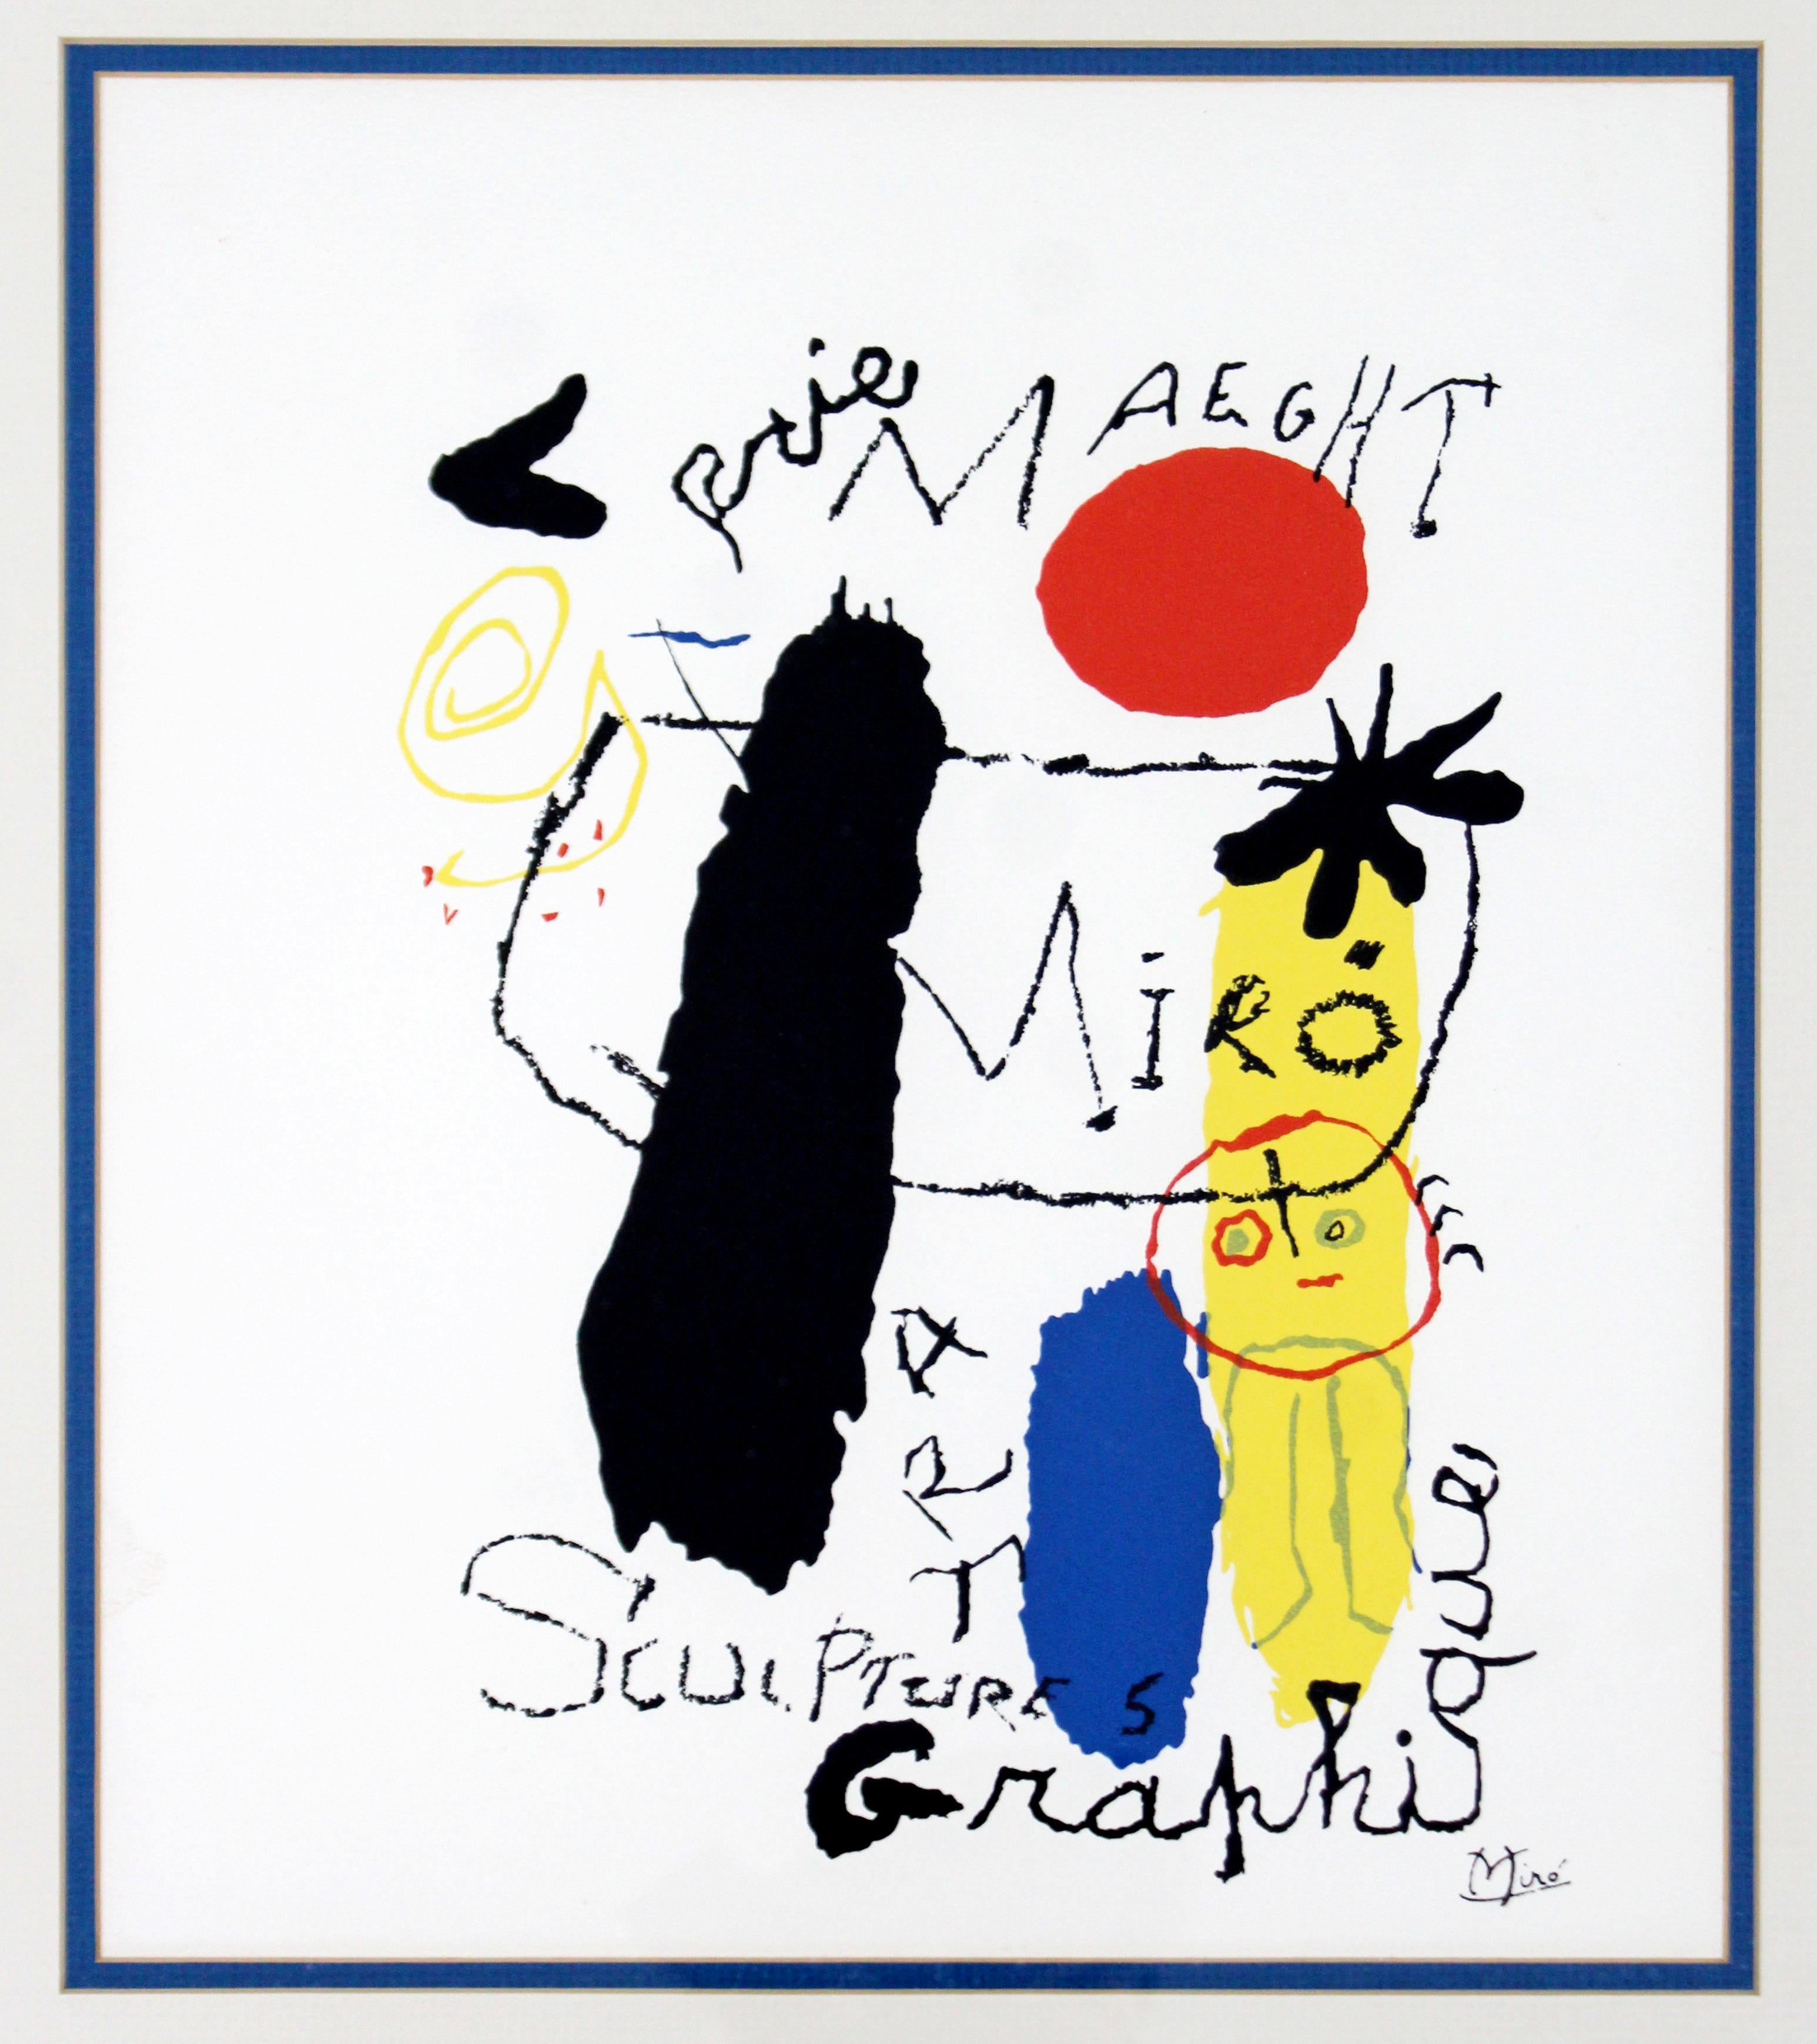 For your consideration is a bold, framed poster print, Joan Miro Galerie Maeght Graphique. In excellent condition. The dimensions of the frame are 18.25